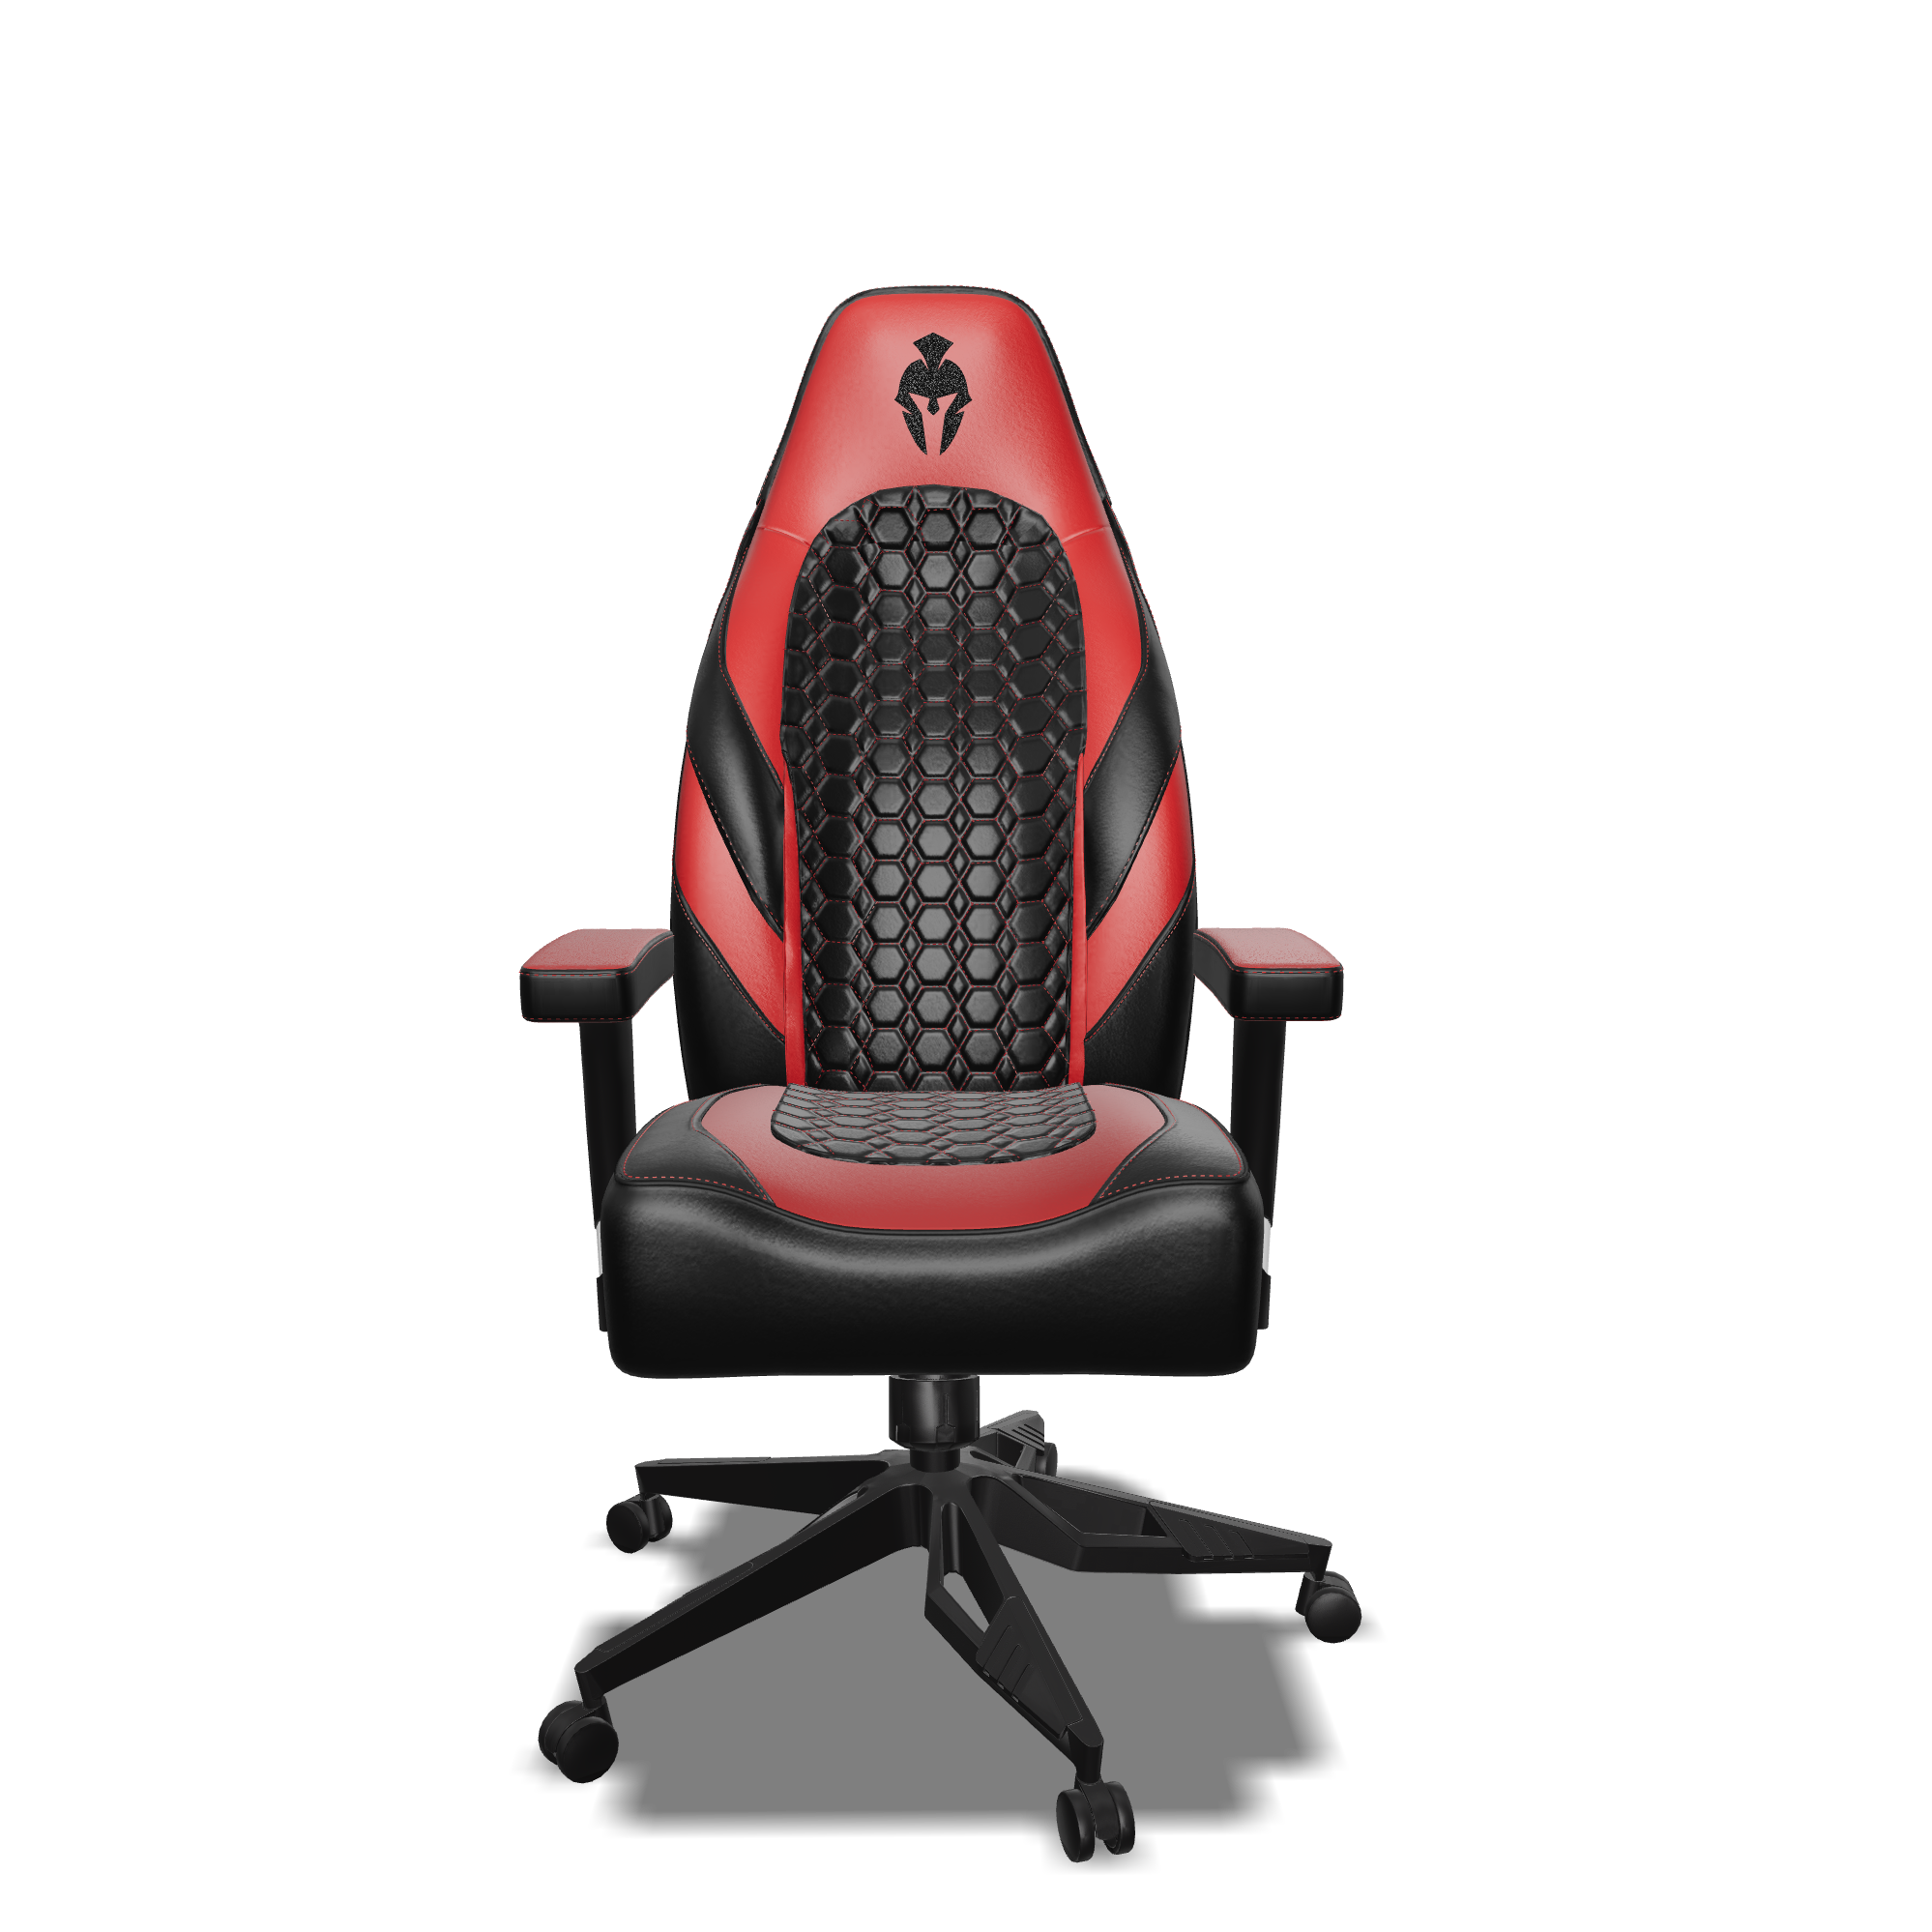 Red and Black gaming chair front view